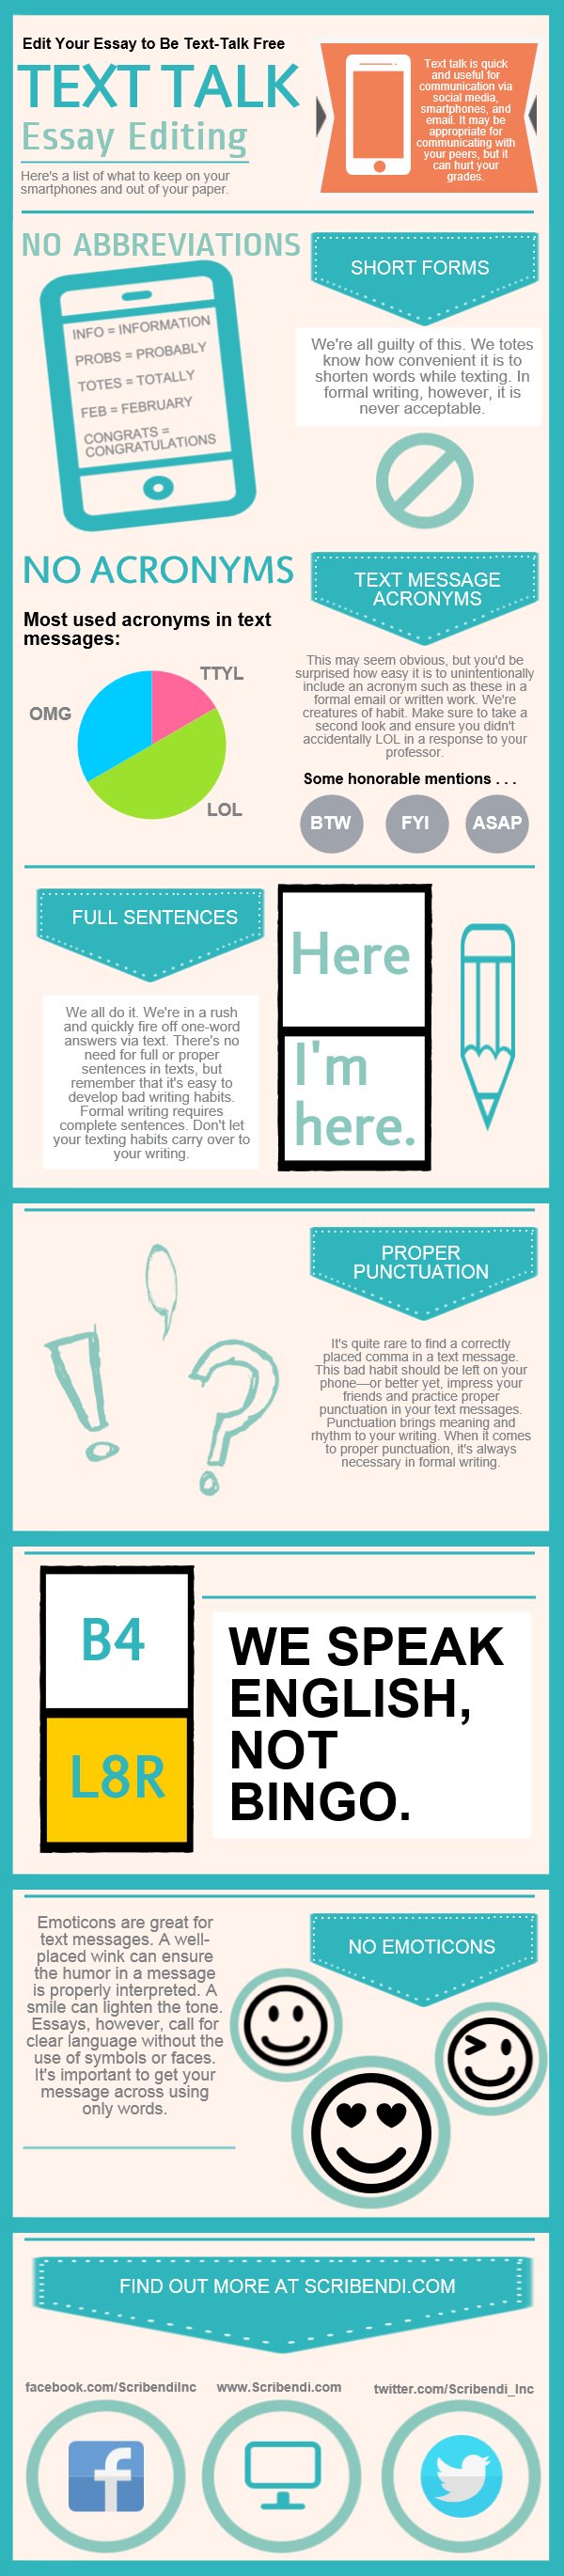 Scribendi.com's infographic about making sure your essay editing includes eliminating text-talk.